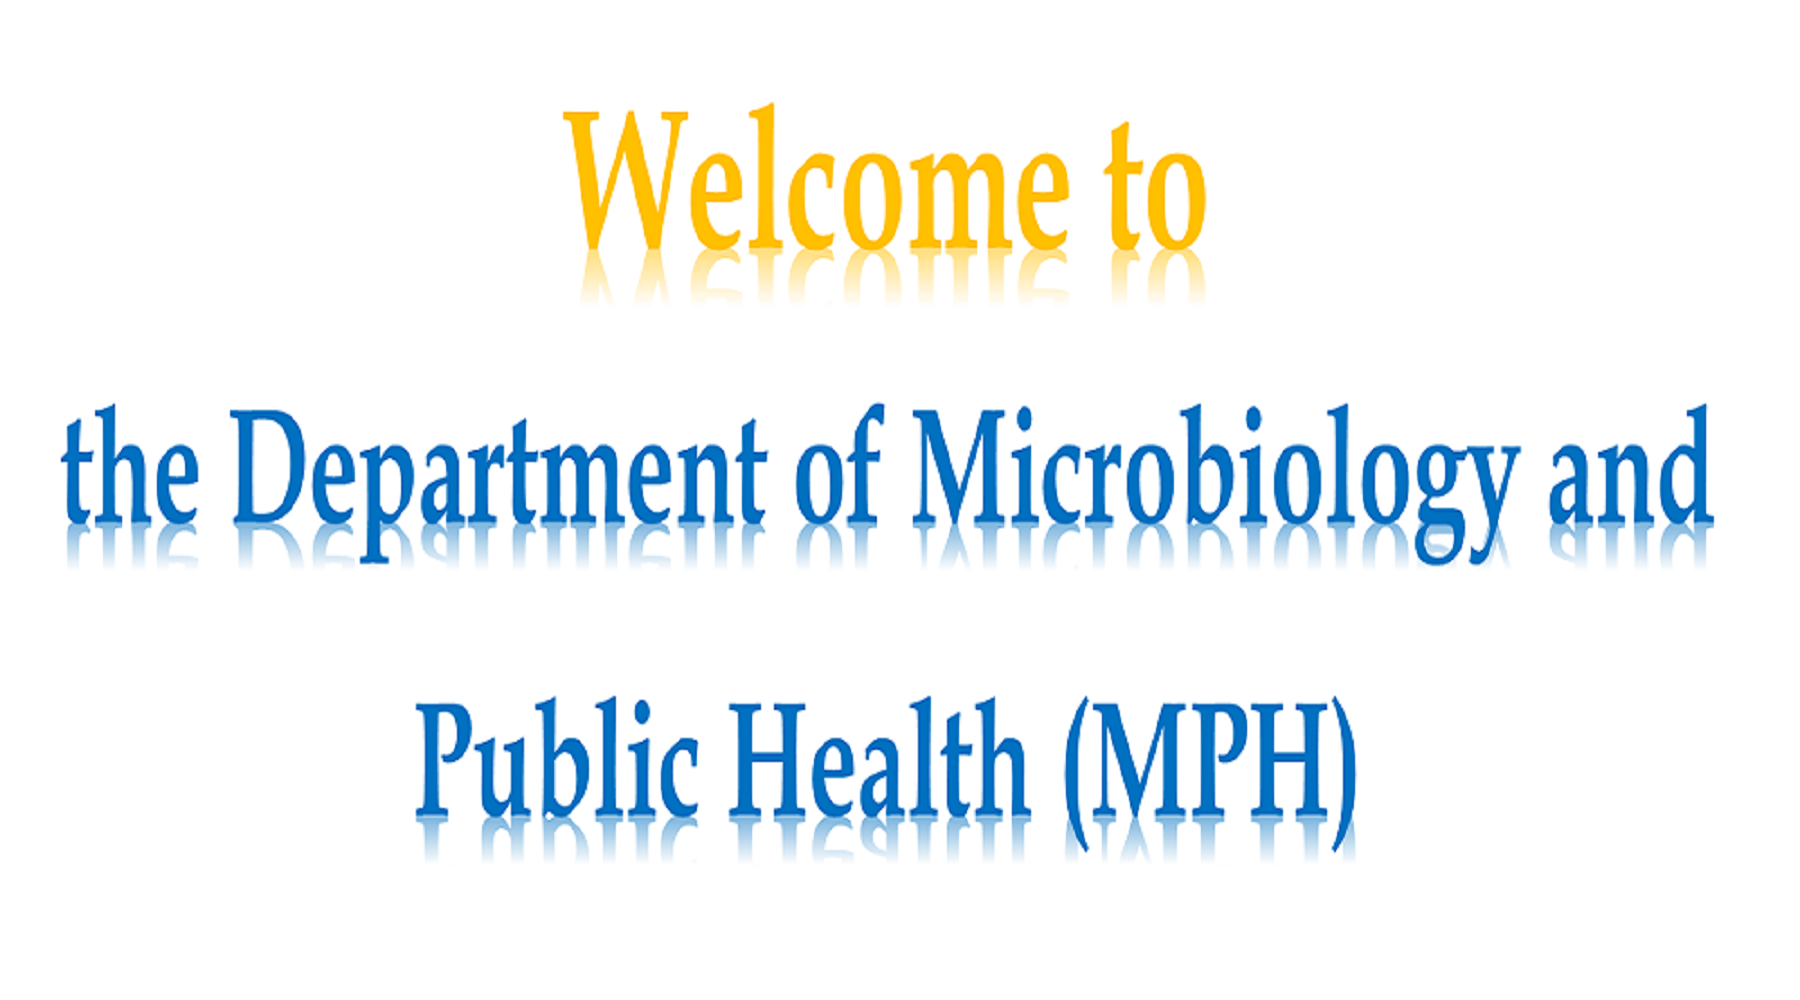 Department of Microbiology and Public Health